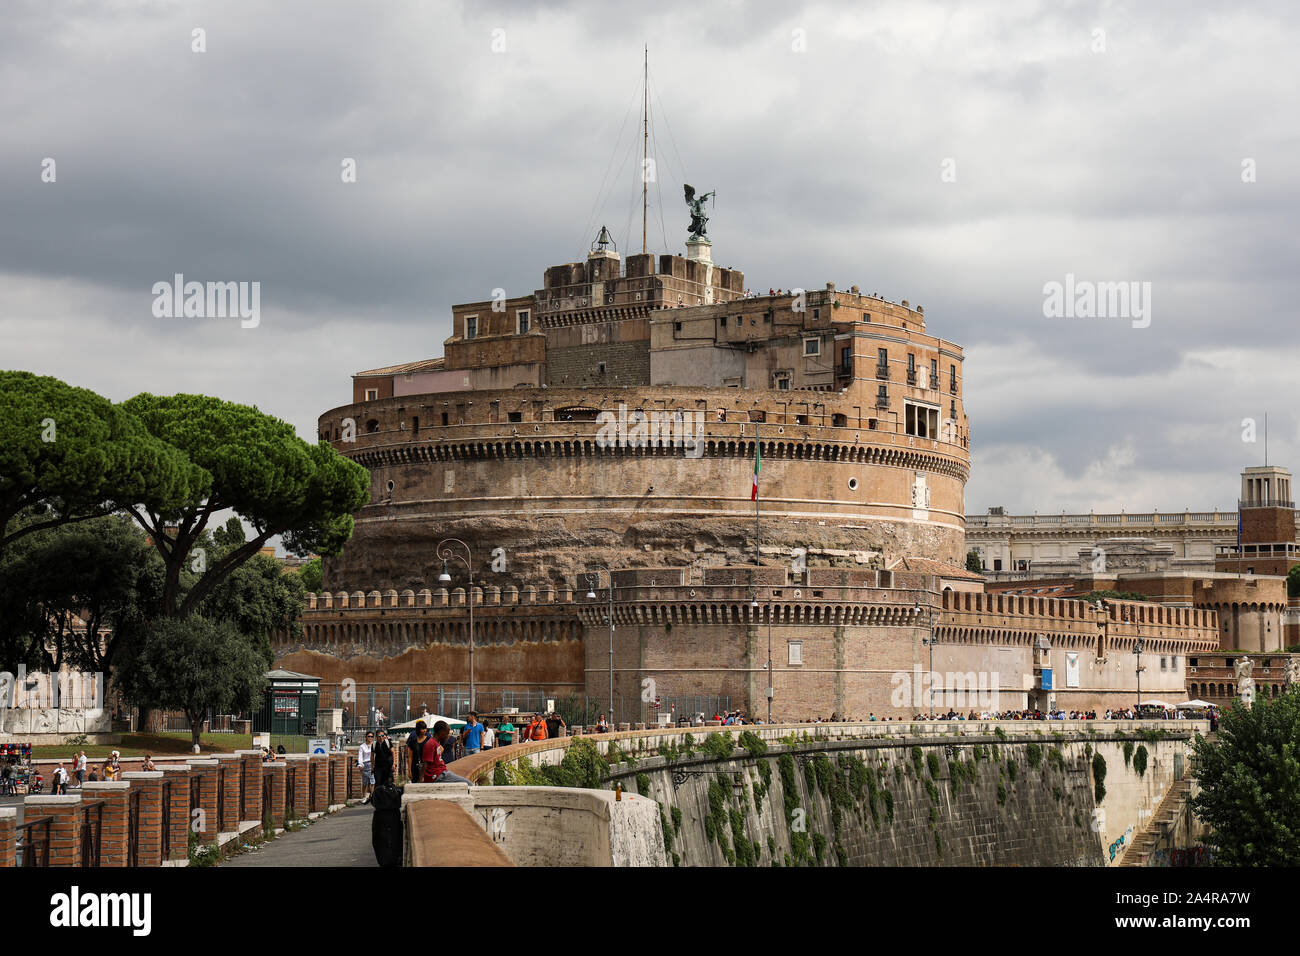 The Mausoleum of Hadrian, usually known as Castel Sant'Angelo, on the right bank of River Tiber in Rome, Italy Stock Photo